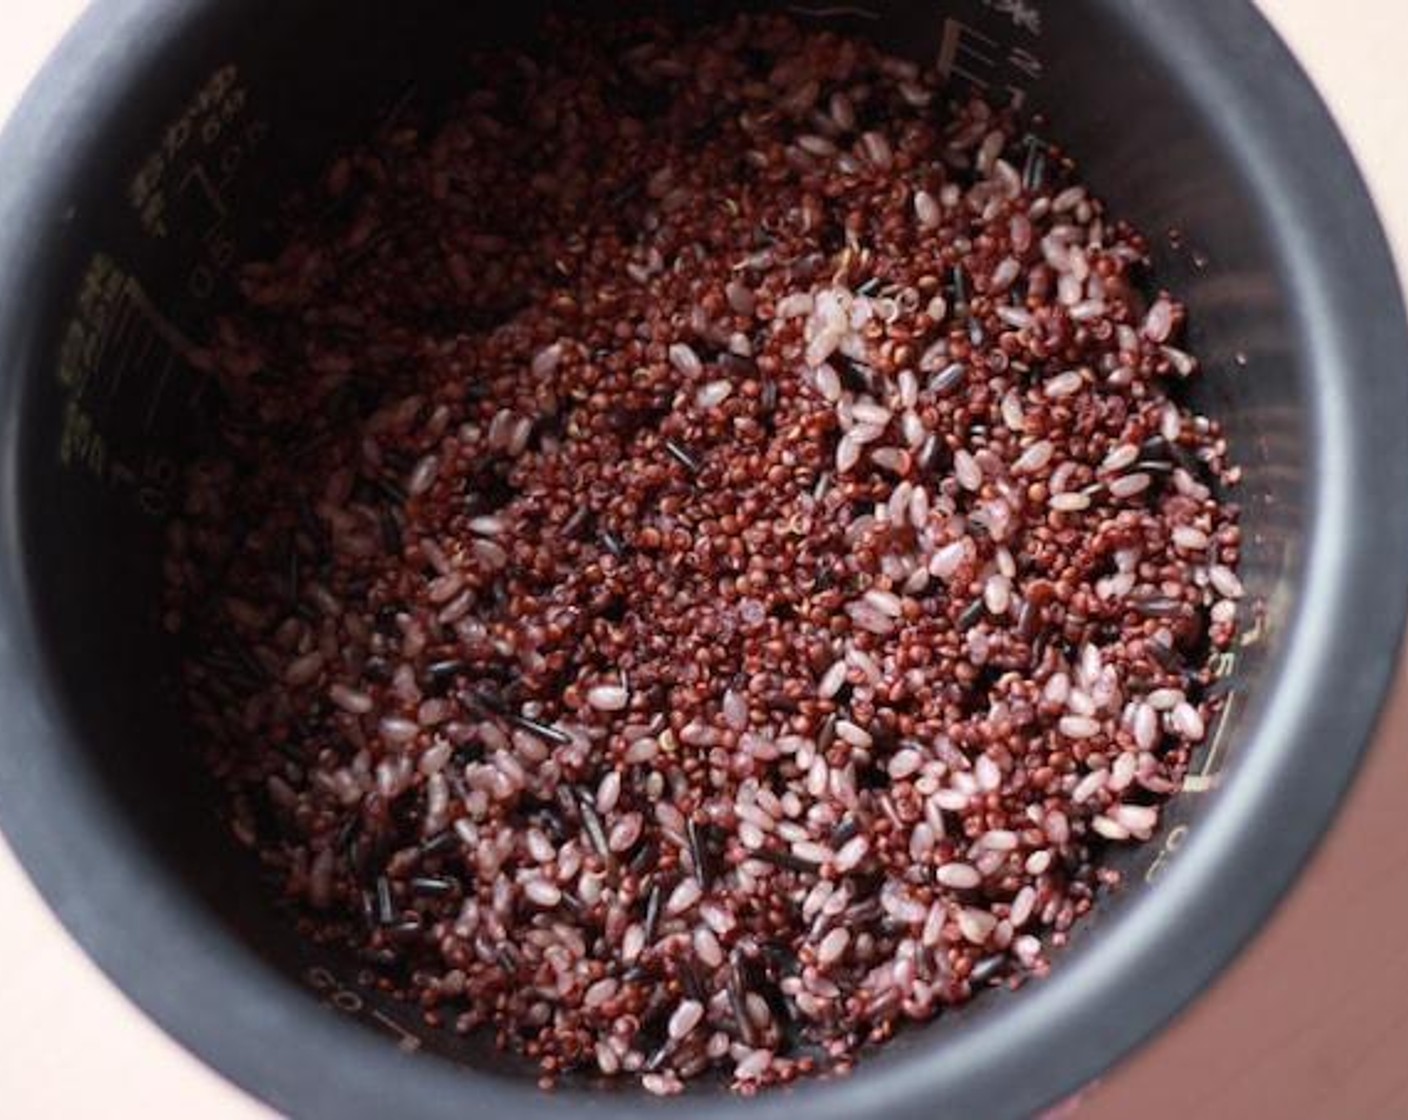 step 6 When rice is done, start flavoring. Mix the cooked rice with the rest of the ingredients. Add Soy Sauce (3 Tbsp), Salt (1 pinch), Ground Black Pepper (1 tsp), Ground Cumin (1 Tbsp), Ground Coriander (1 tsp), and Cayenne Pepper (1 tsp) in the bowl and mix well!